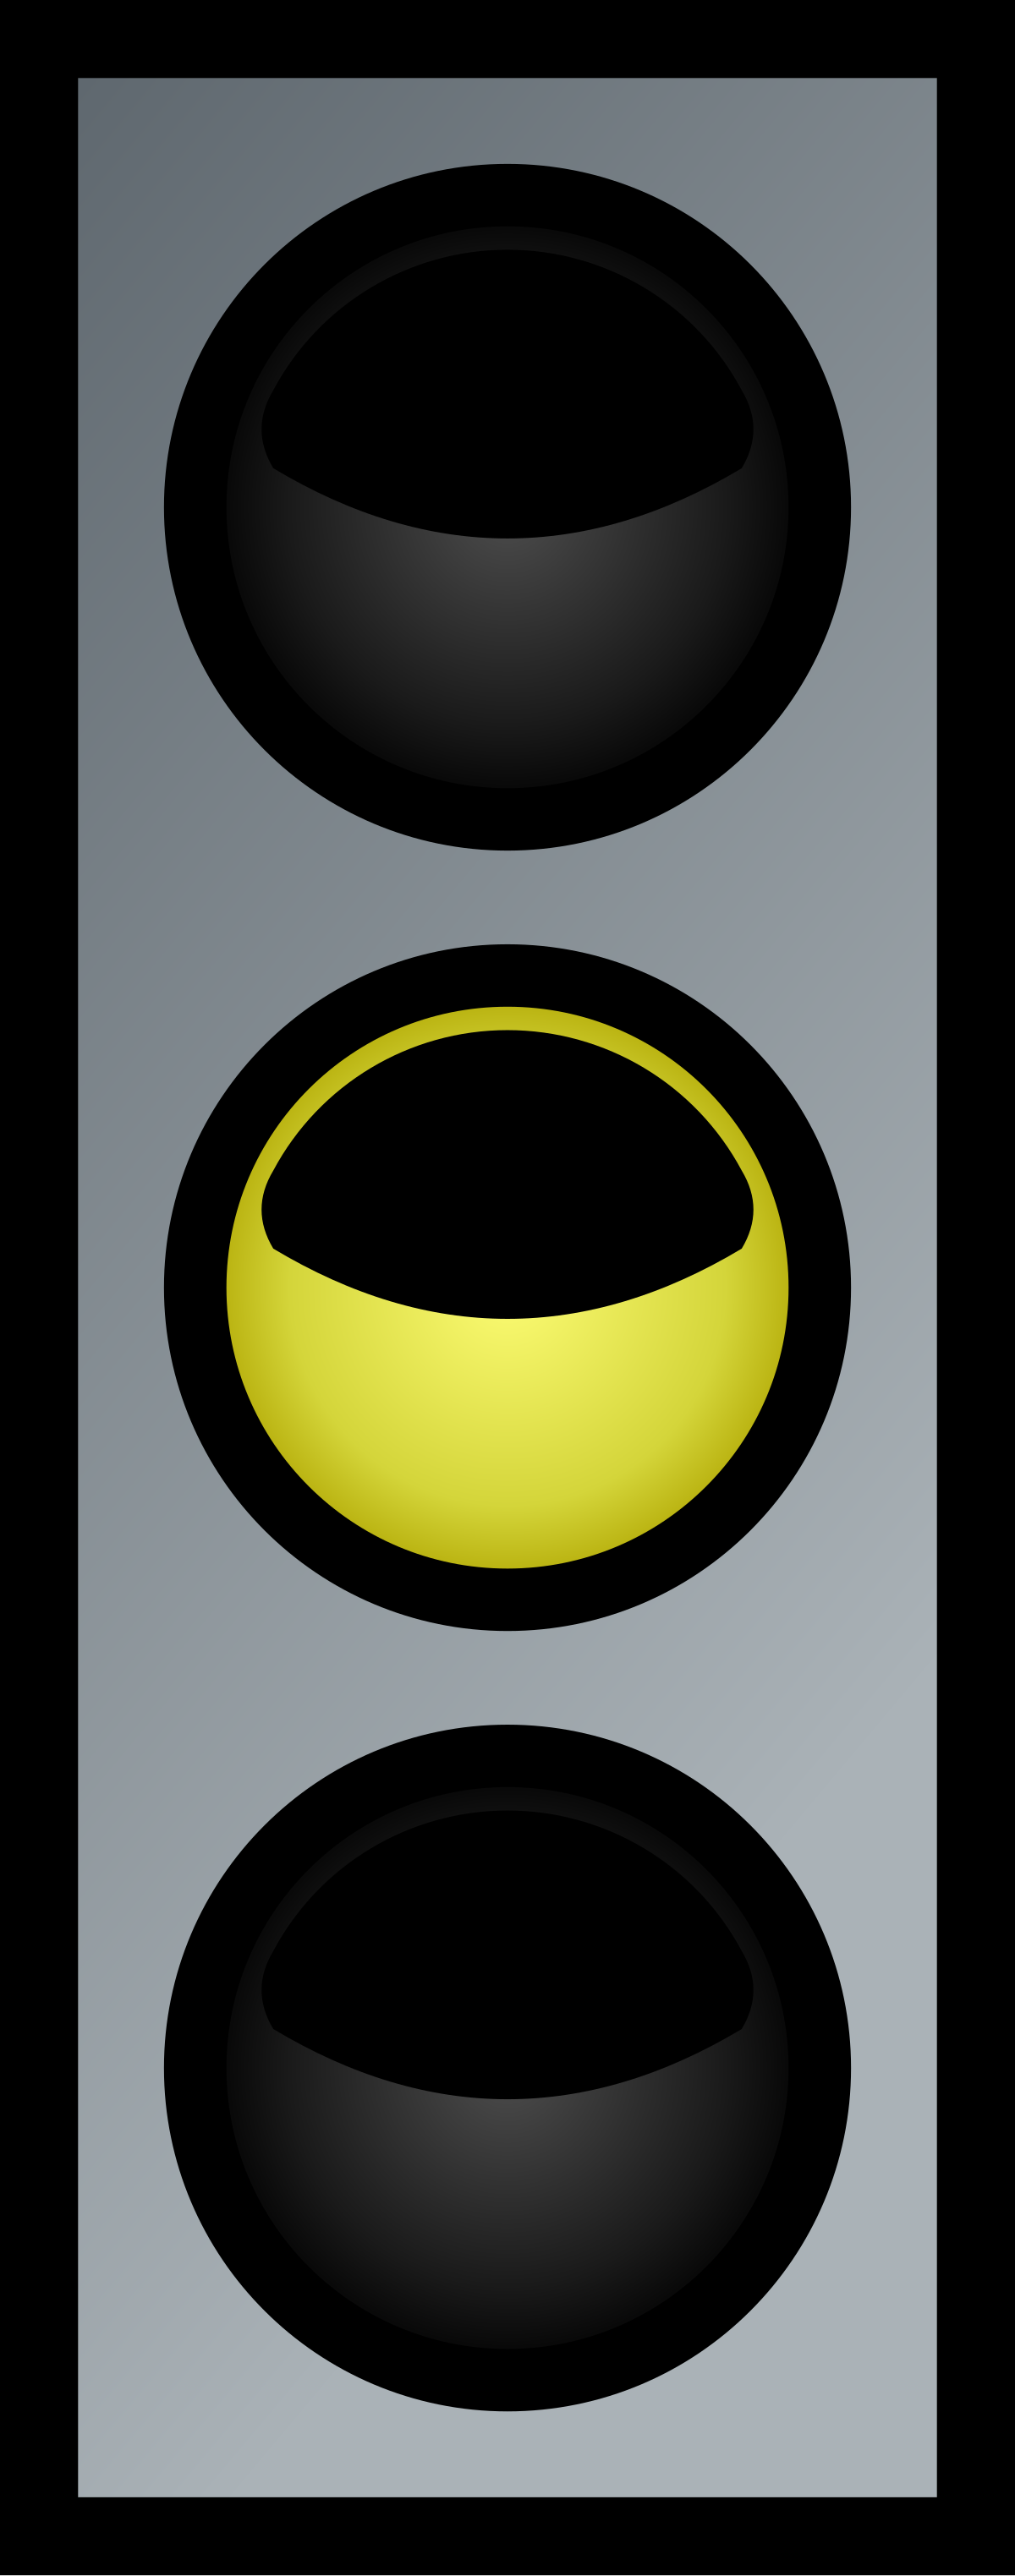 hardware Niende innovation File:Traffic lights yellow.svg - Wikimedia Commons